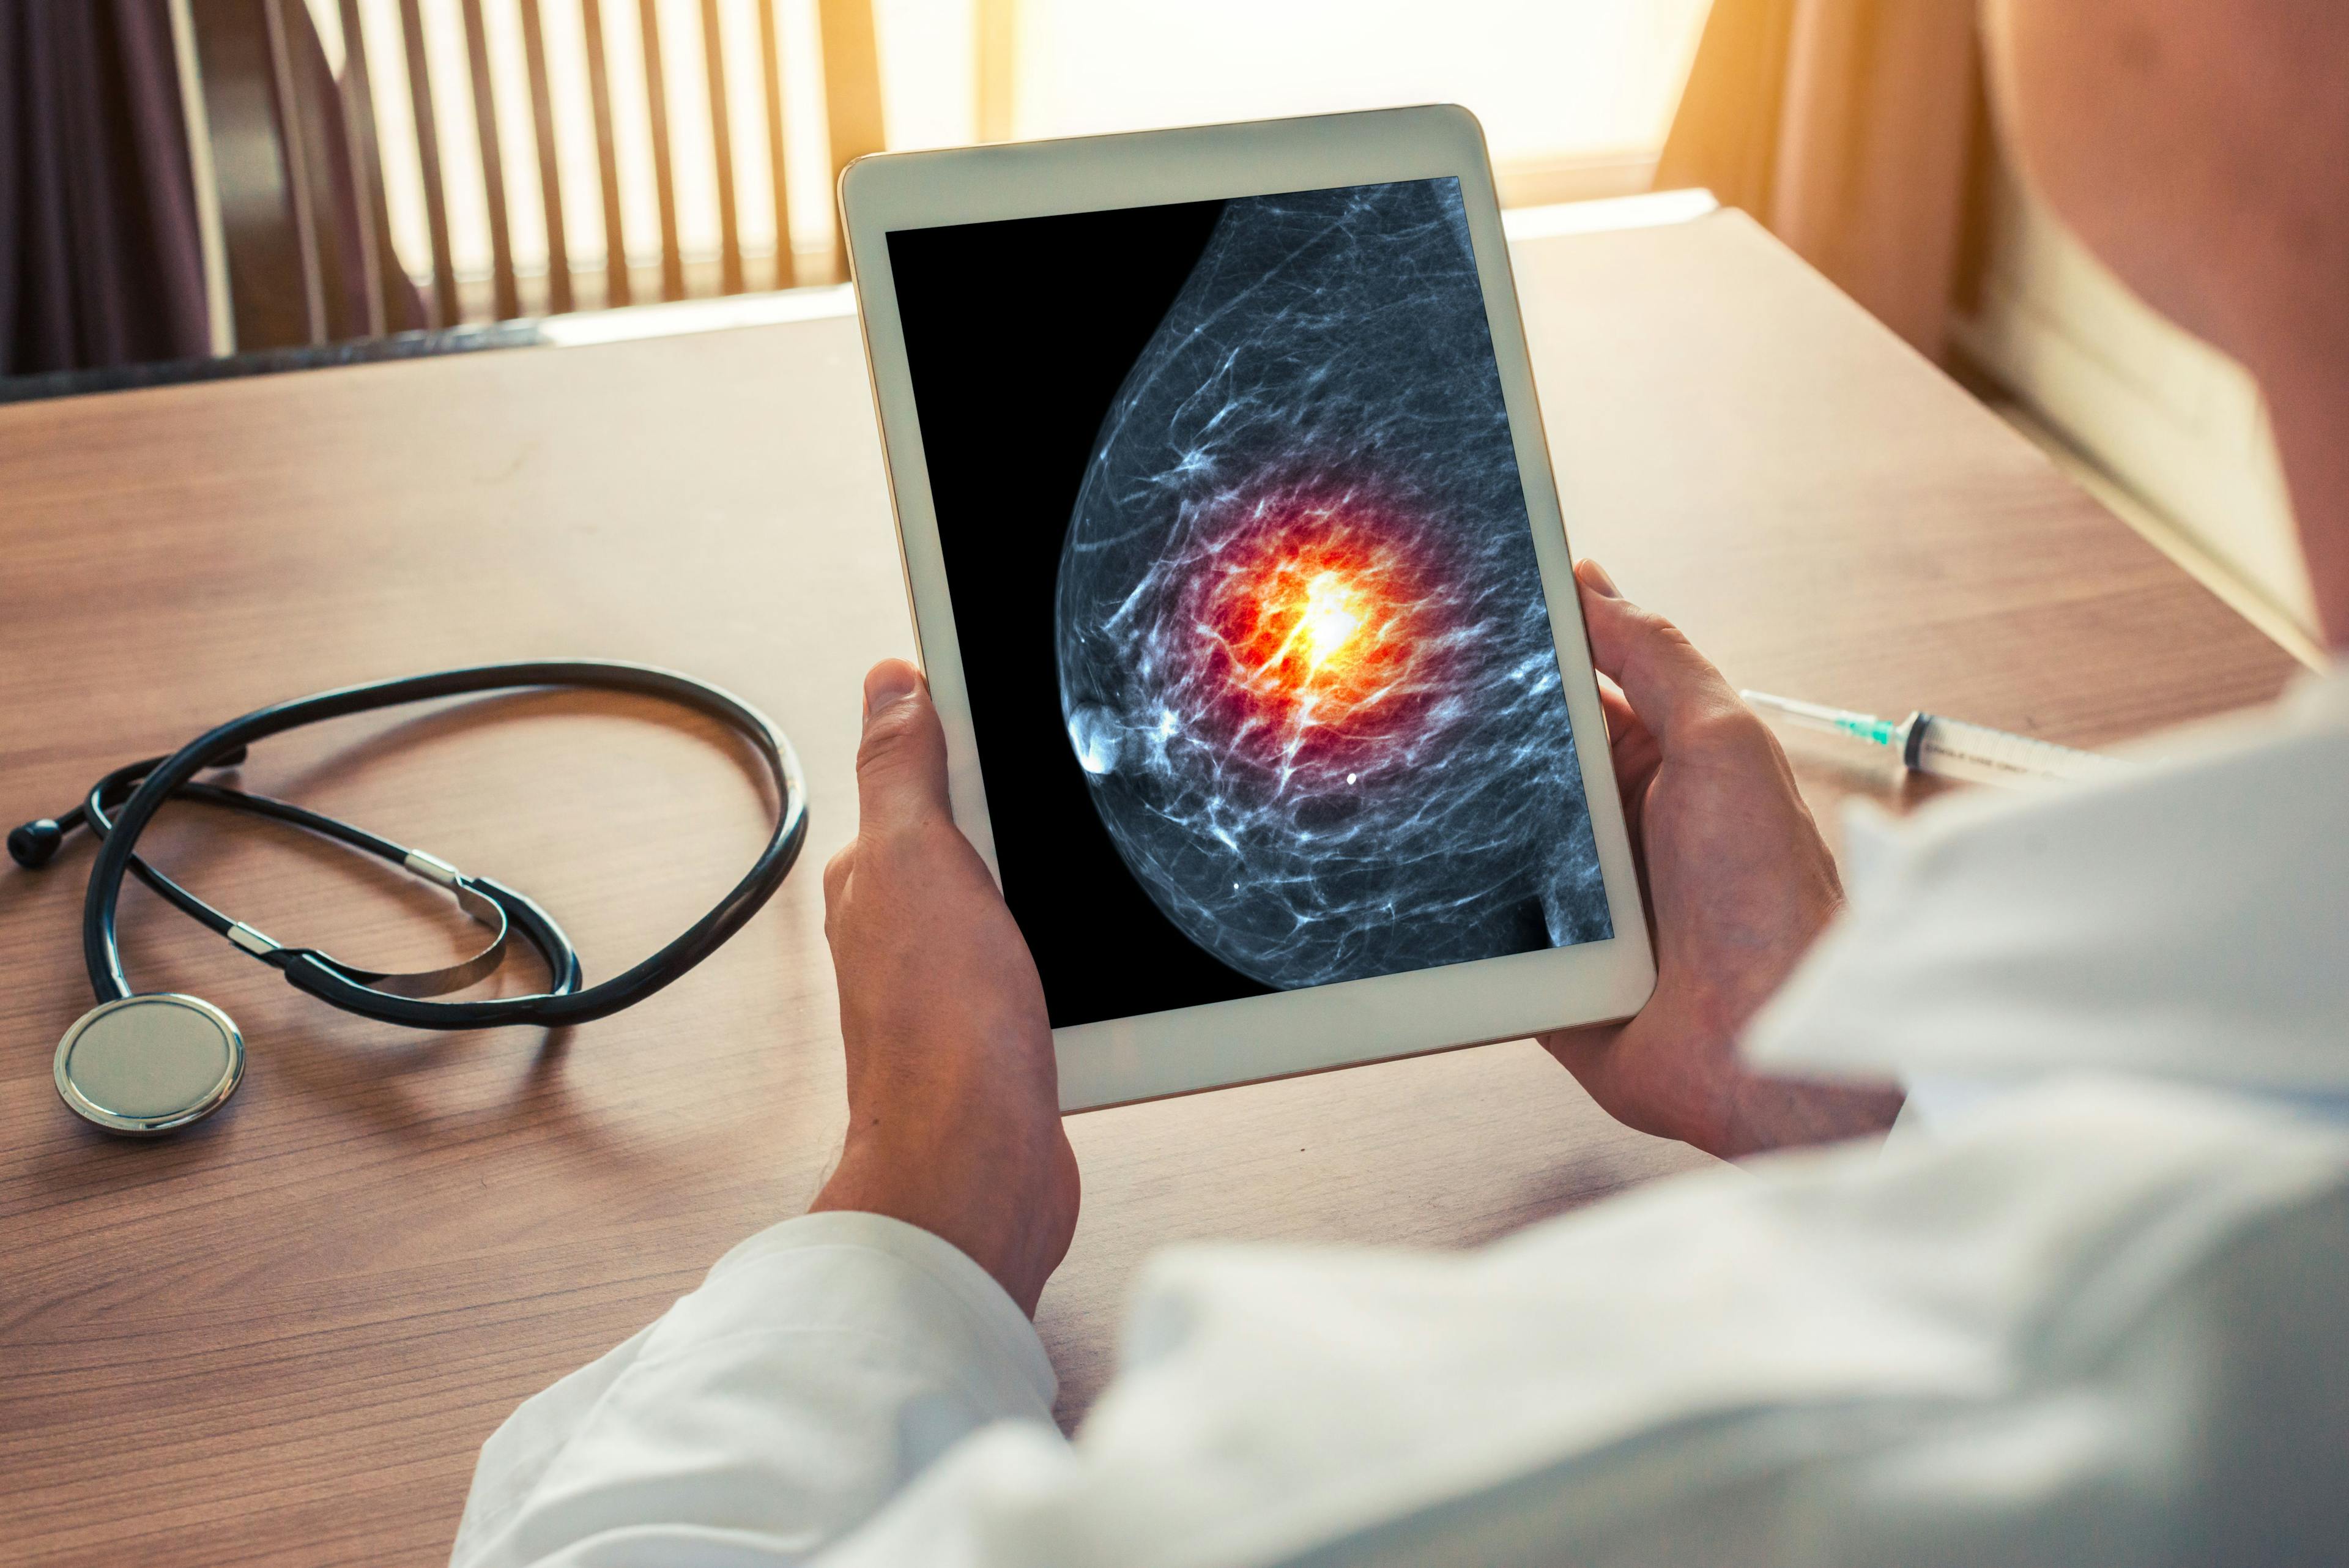 Health care worker holding a digital tablet with x-ray mammogram -- Image credit: steph photographies | stock.adobe.com